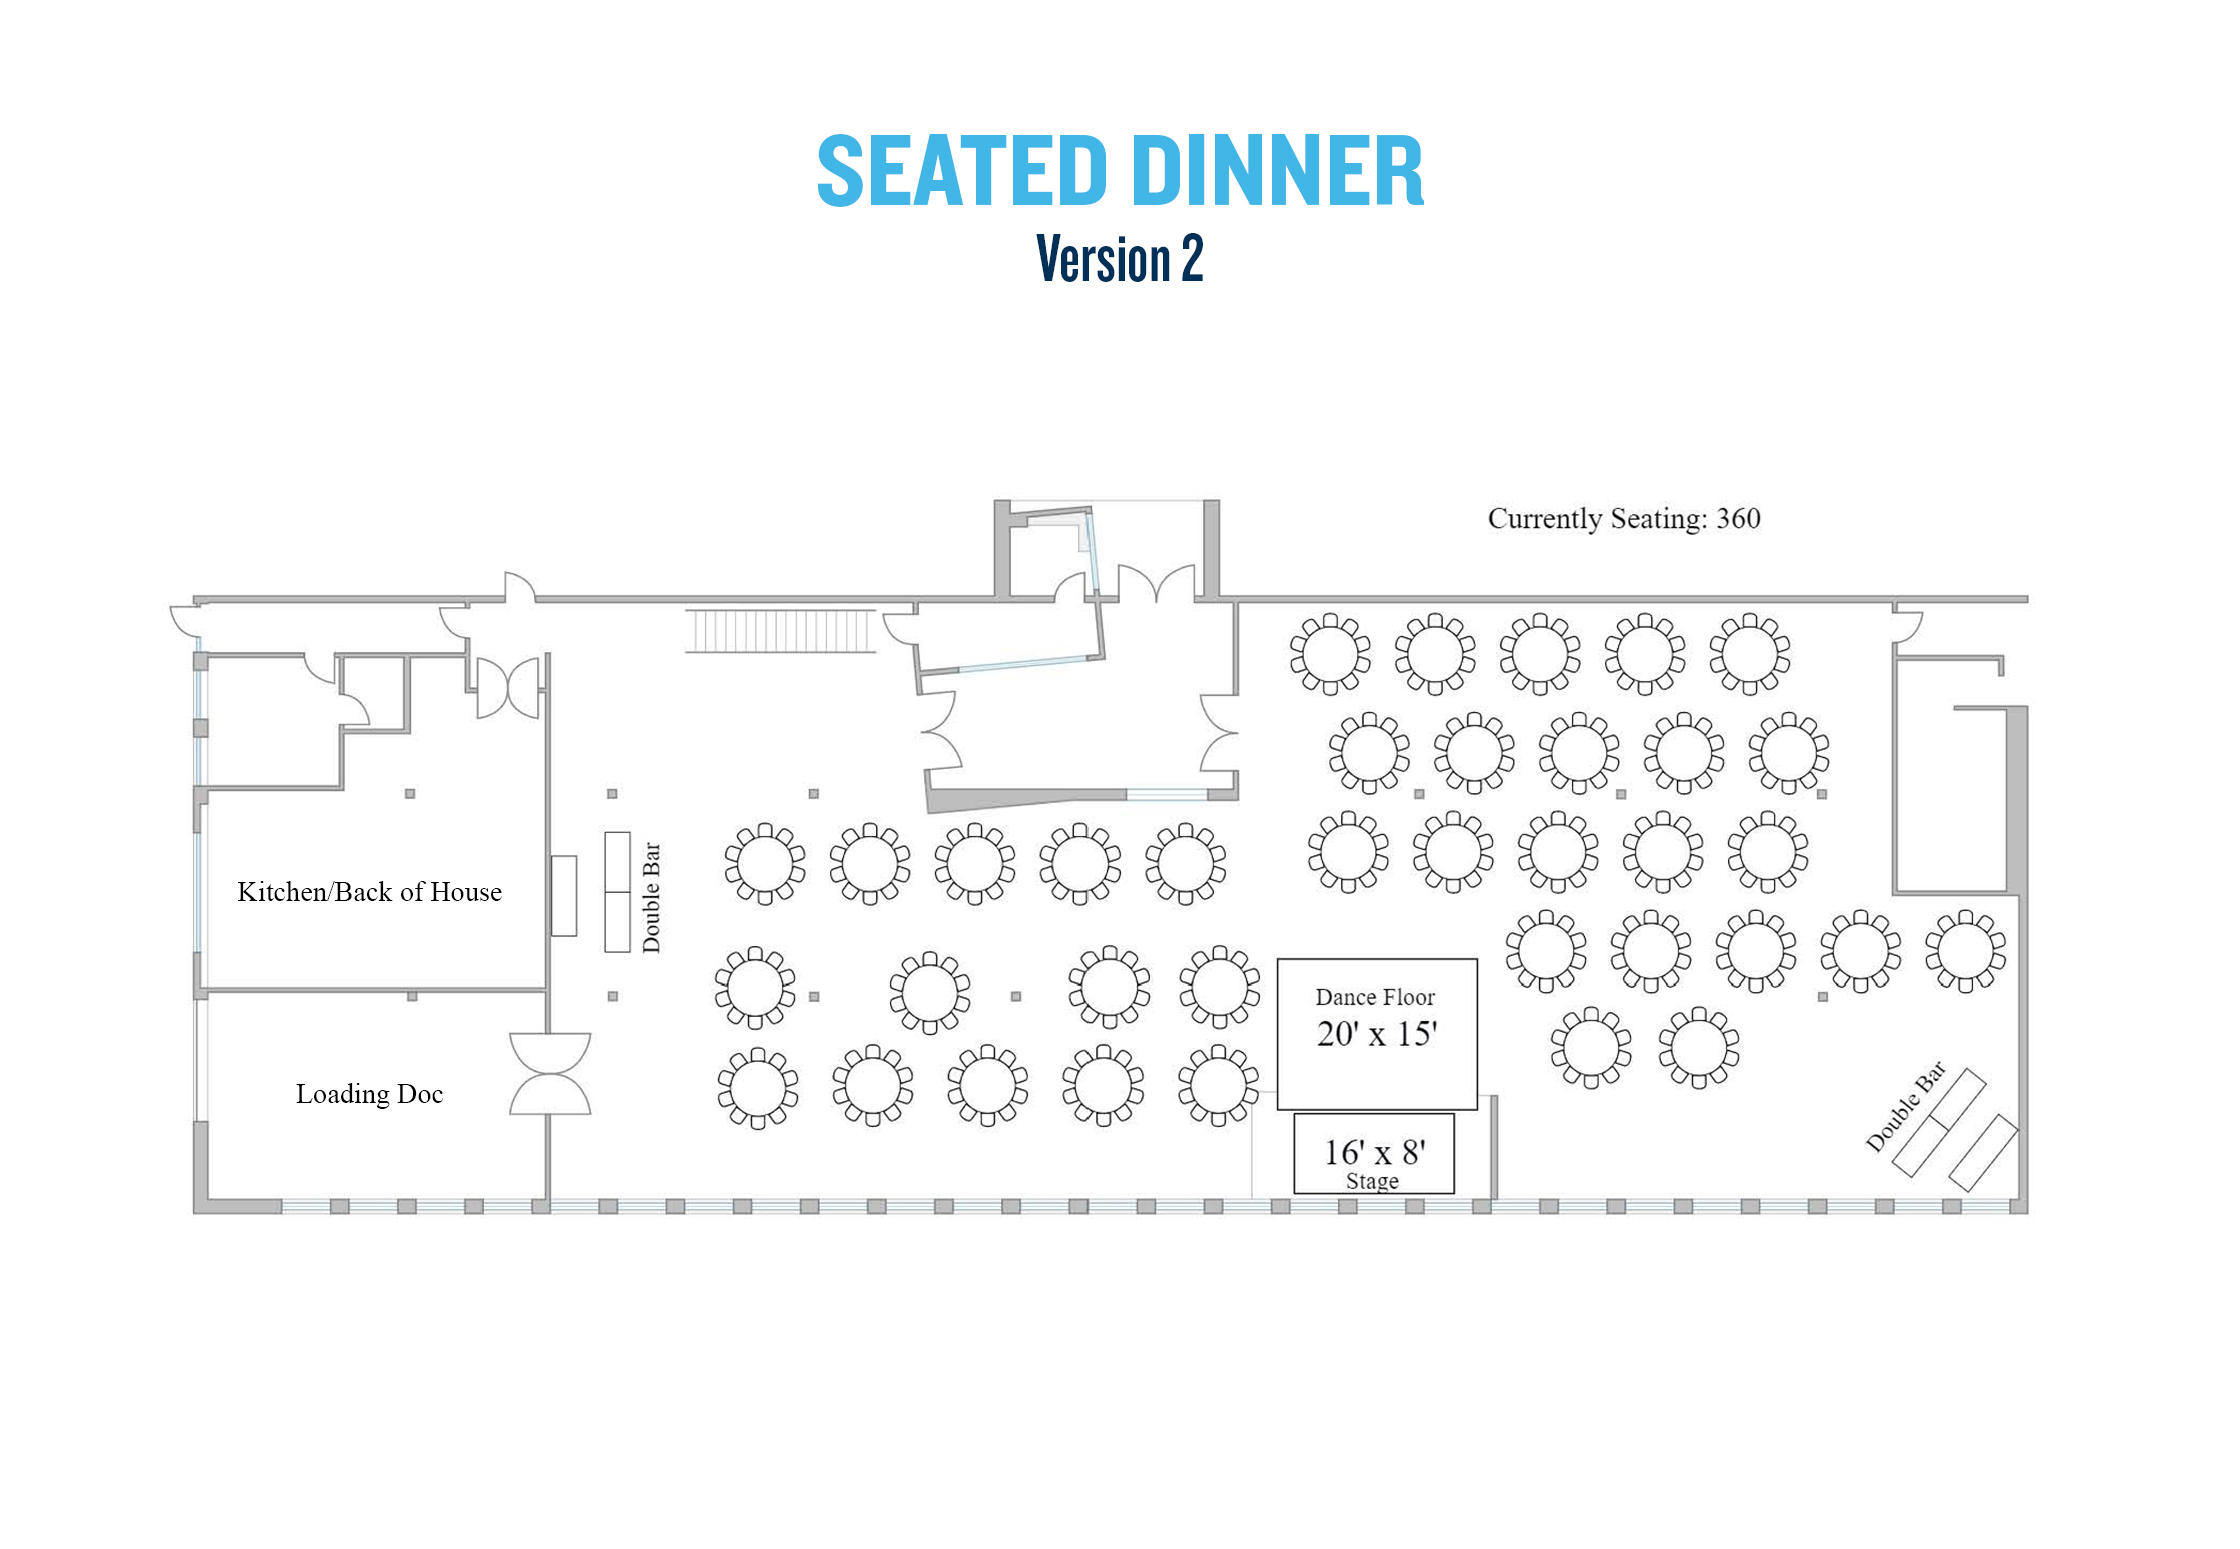 This layout can seat 360 guests which includes two separate double bars, a dance floor and stage.